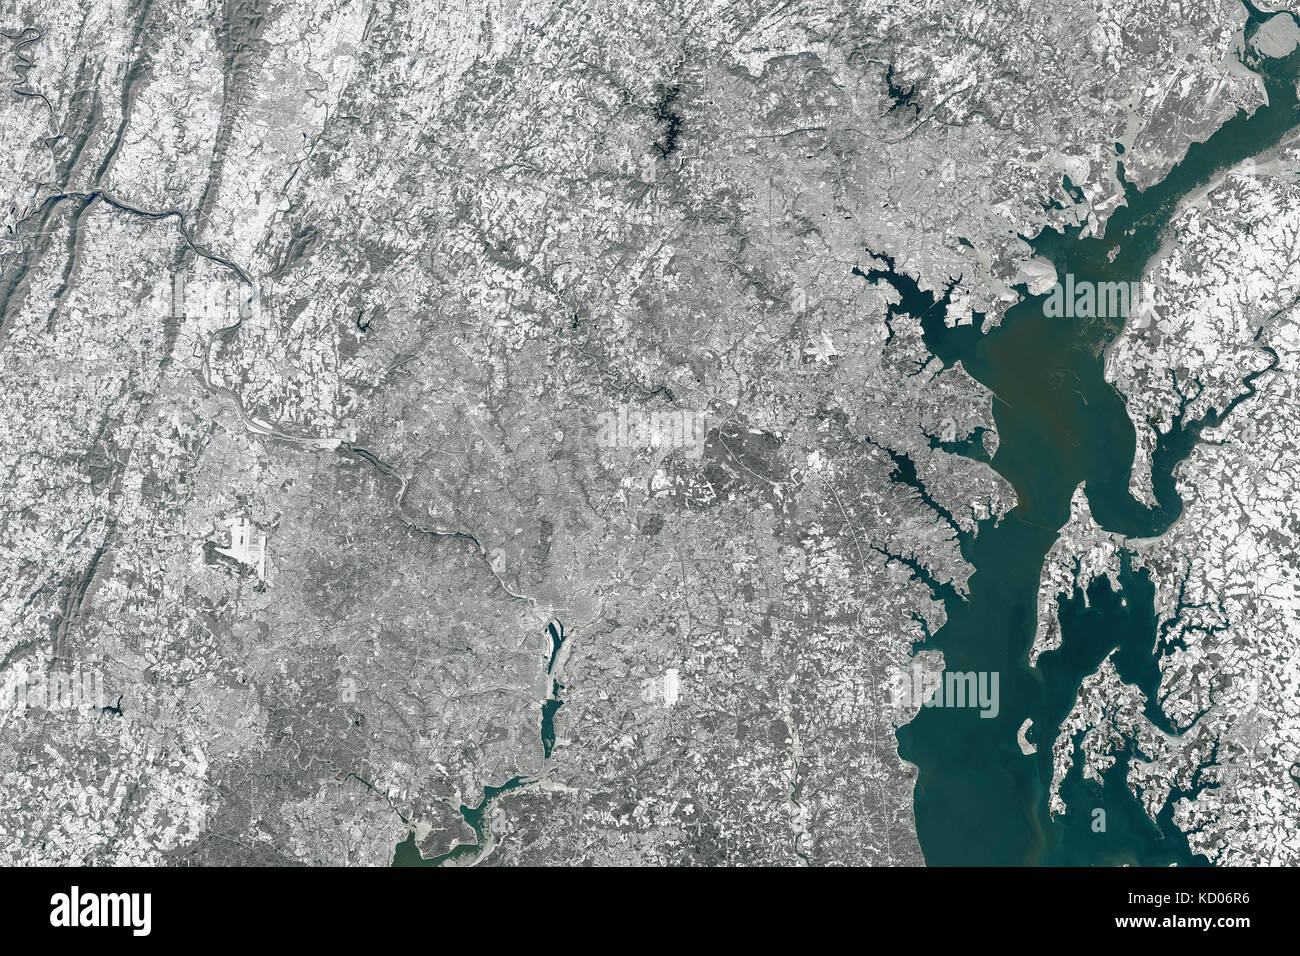 Satellite image of of Virginia, Maryland, and Washington, D.C. in the early afternoon on January 24, 2016 after heavy snowfall Stock Photo